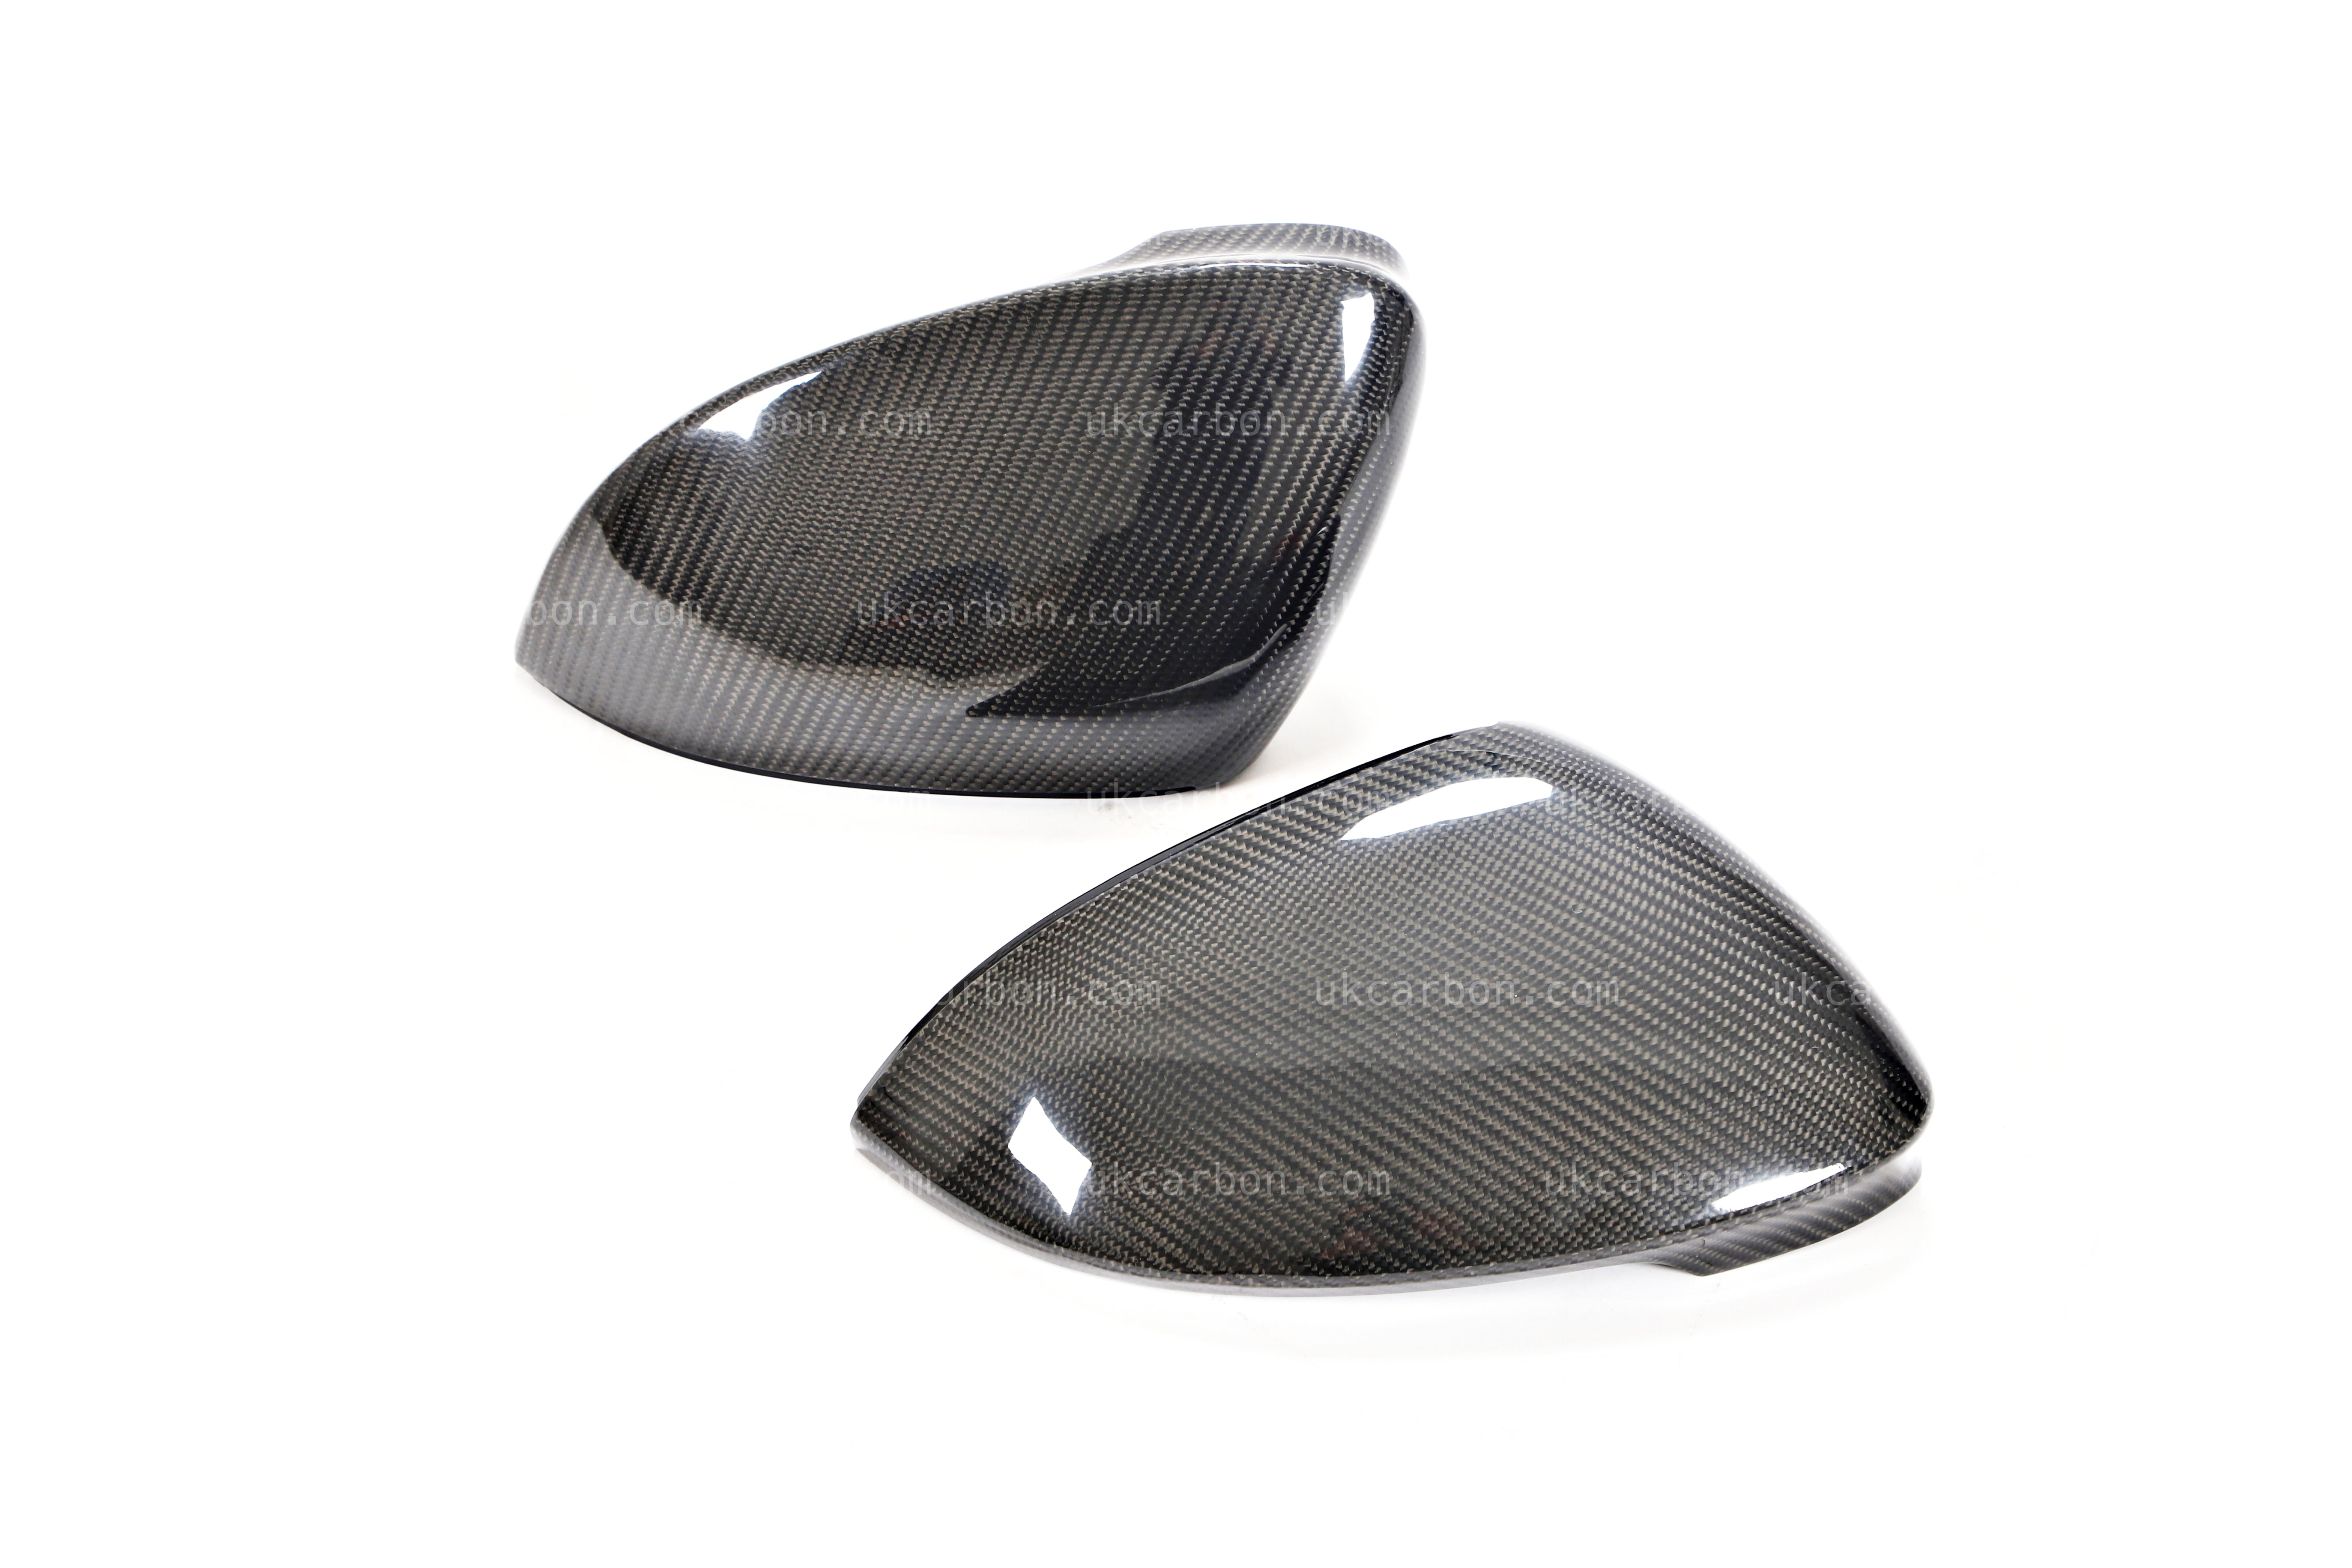 Volkswagen Golf GTI R Carbon Fibre Wing Mirror Cover VW MK8 by UKCarbon